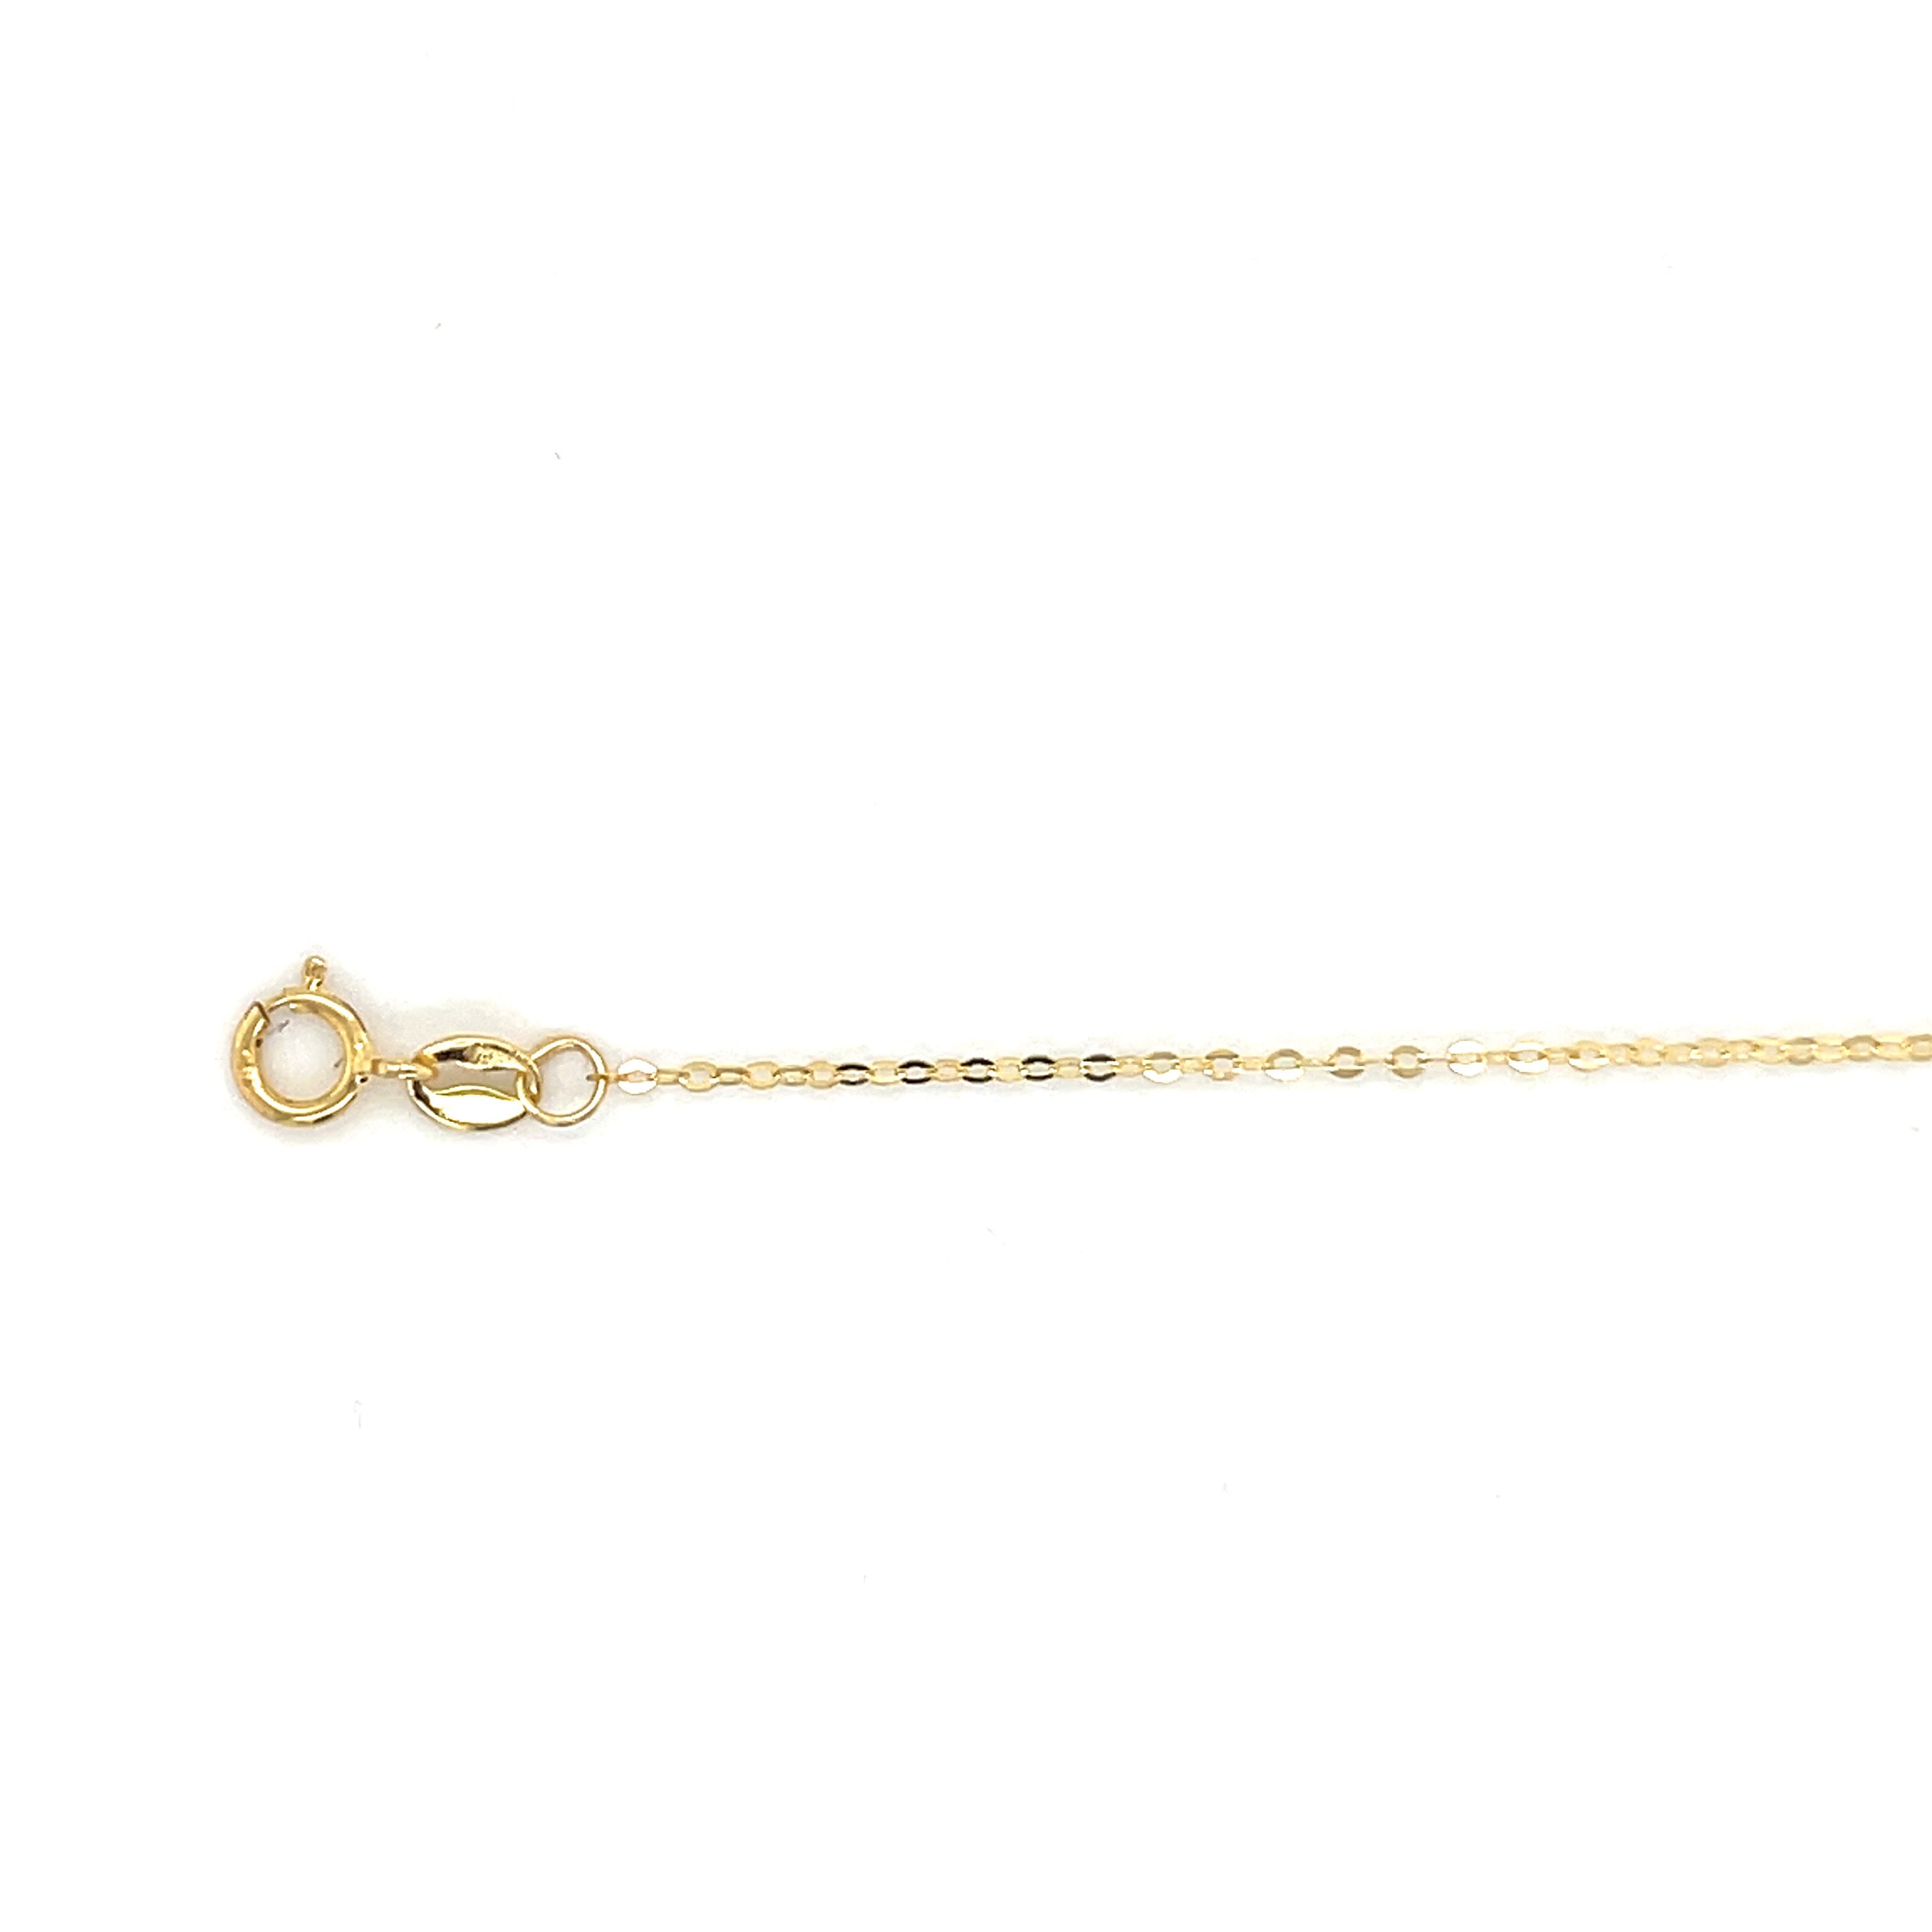 14K Gold North Star Compass Necklace